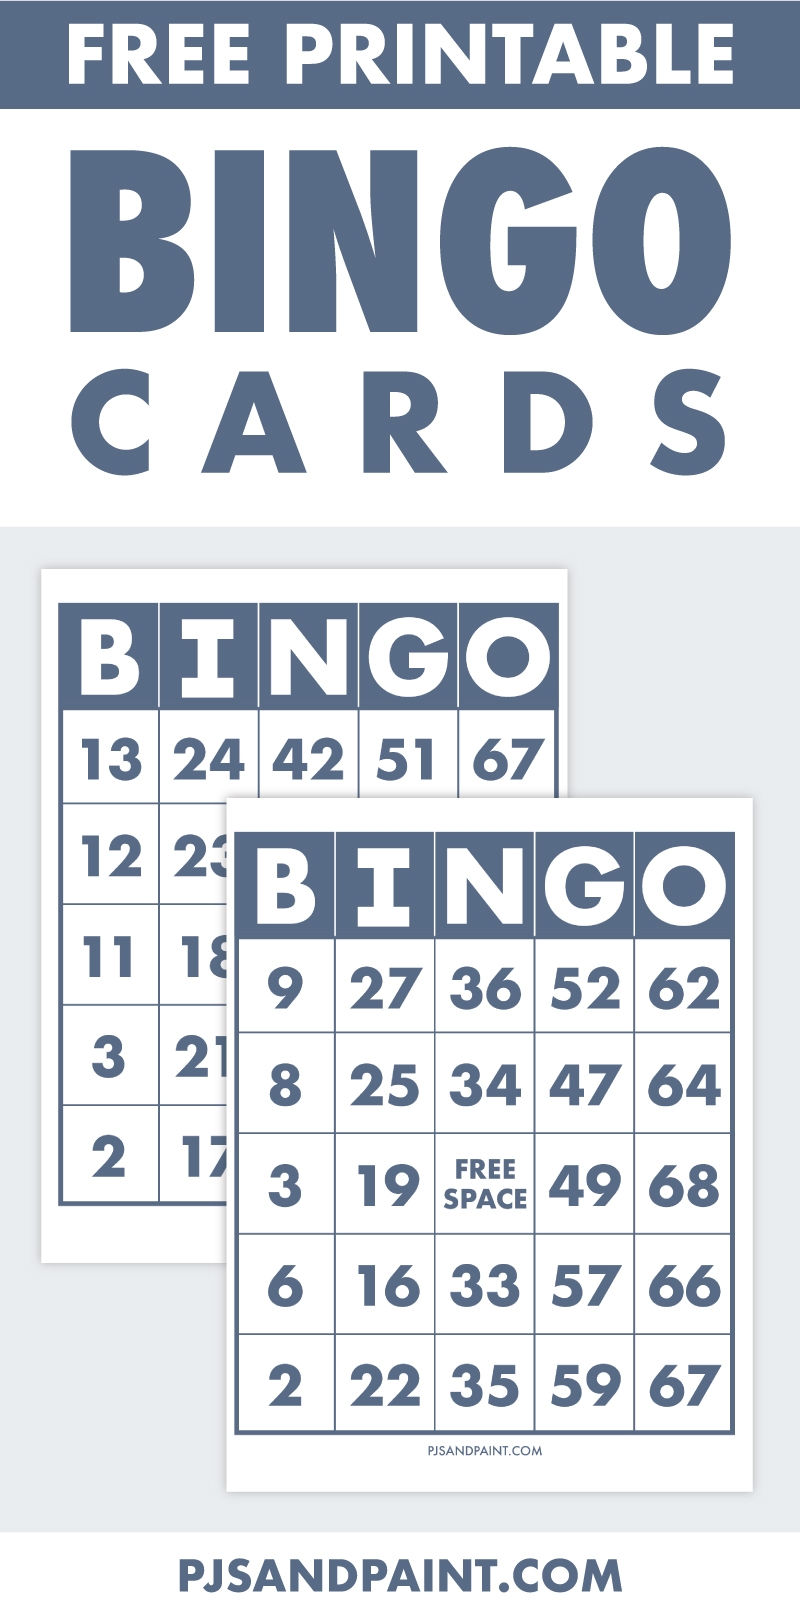 Free Printable Bingo Cards Pjs And Paint - Free Printable Bingo Cards For Large Groups